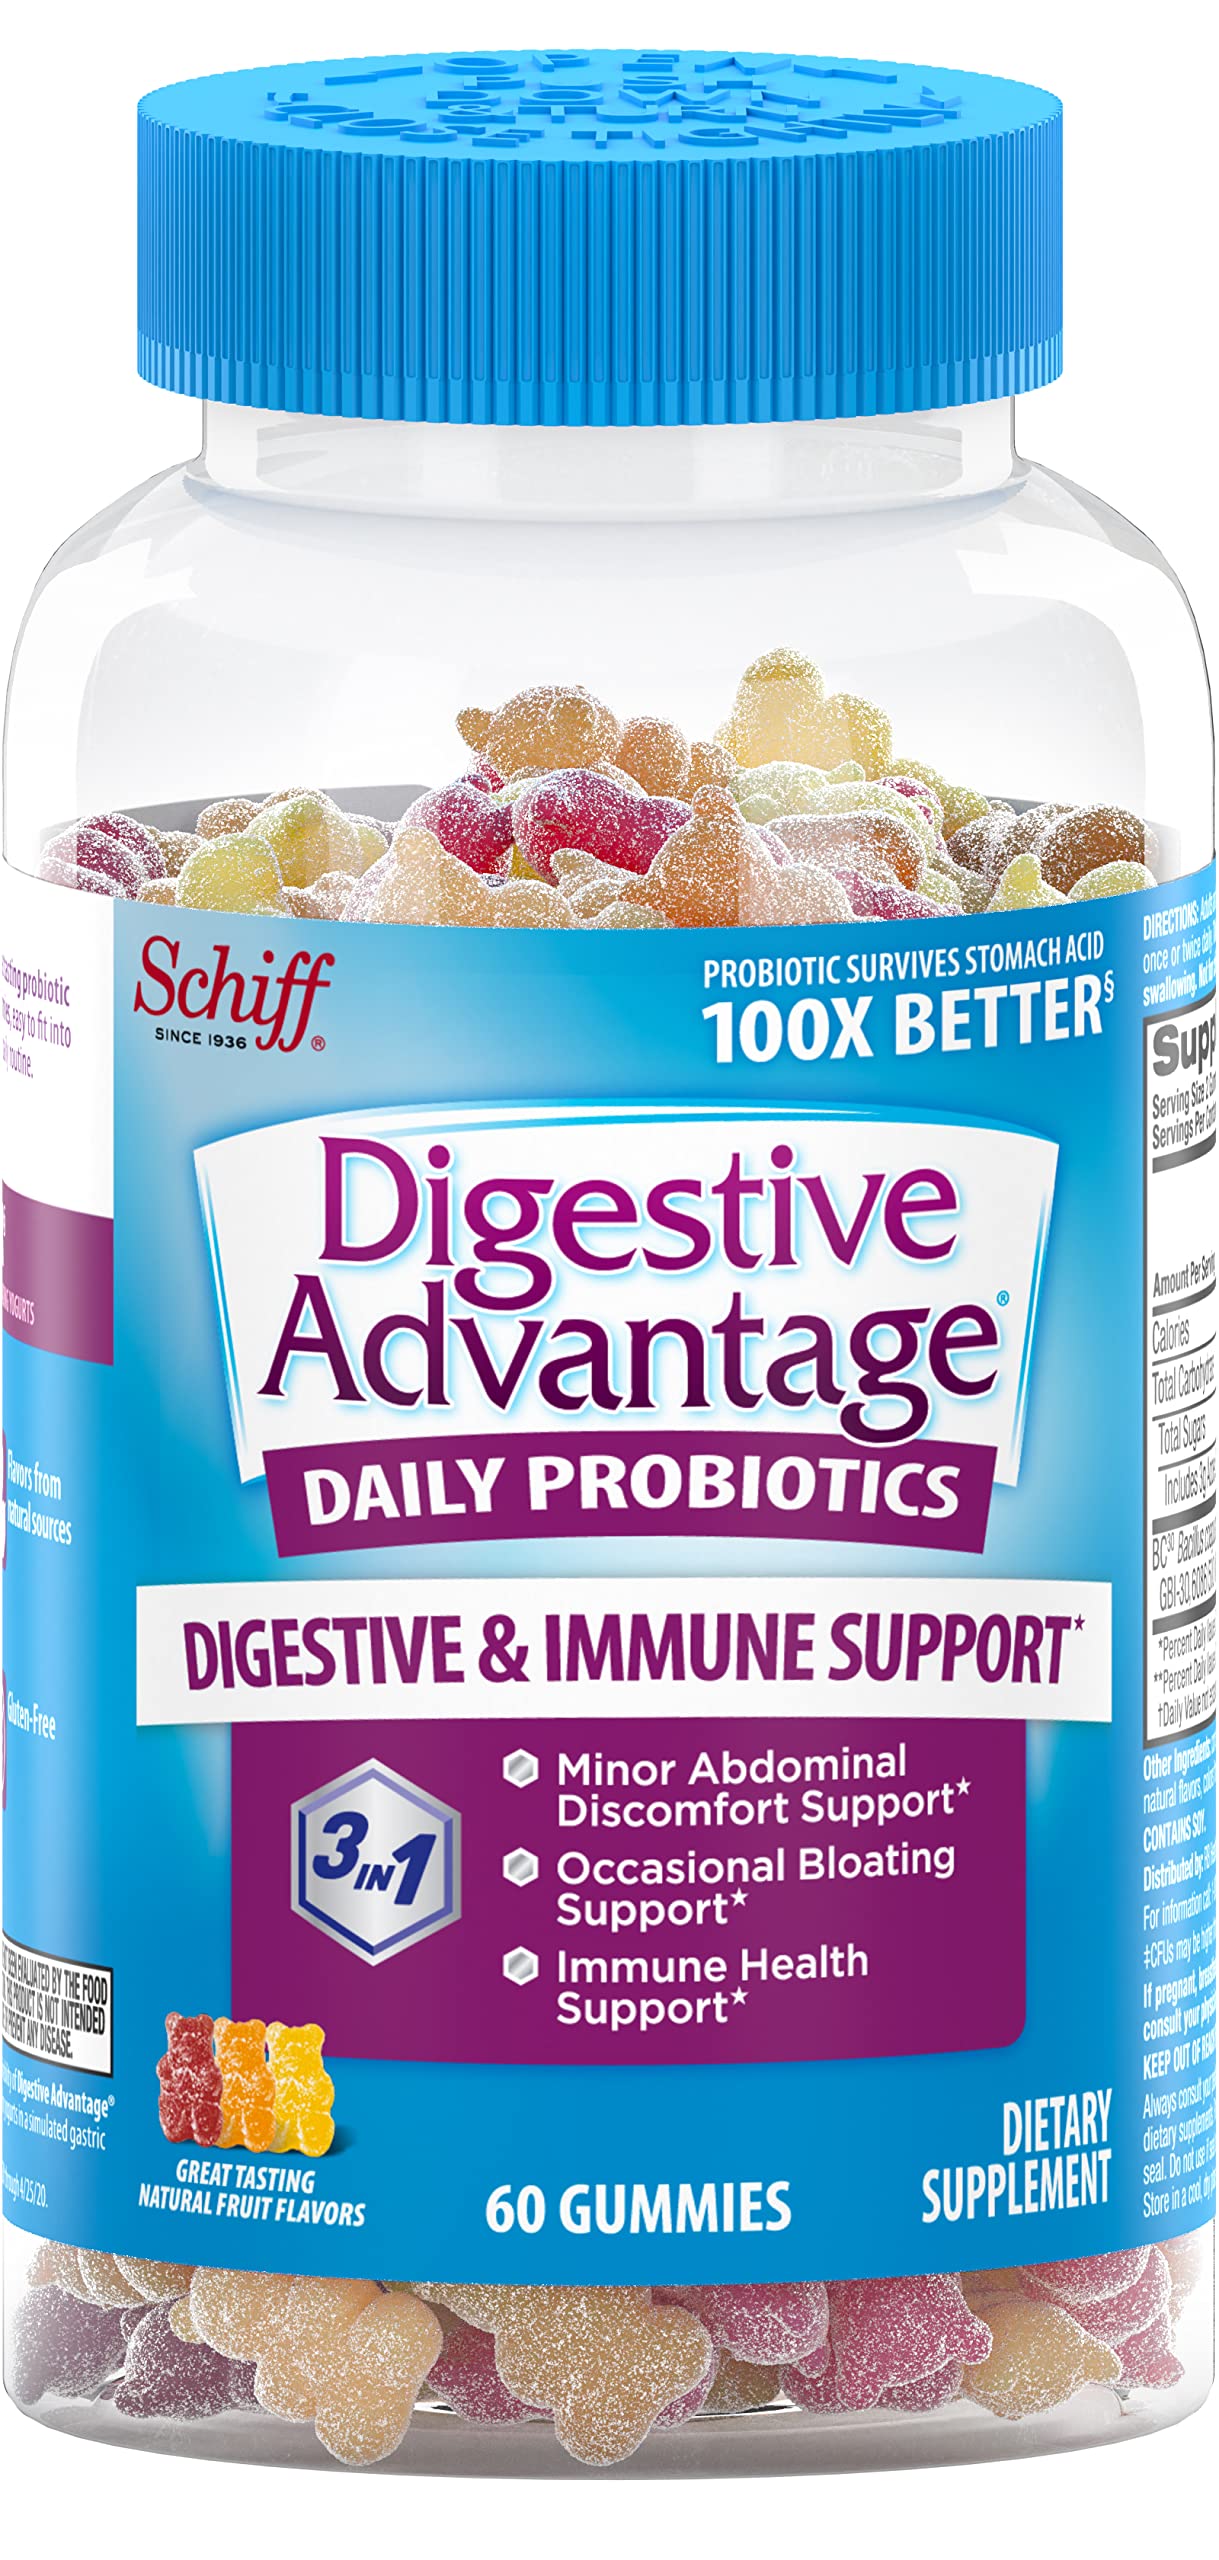 Digestive Advantage Probiotic Gummies For Digestive Health, Daily Probiotics For Women & Men, Support For Occasional Bloating, Minor Abdominal Discomfort & Gut Health, 60ct Natural Fruit Flavors